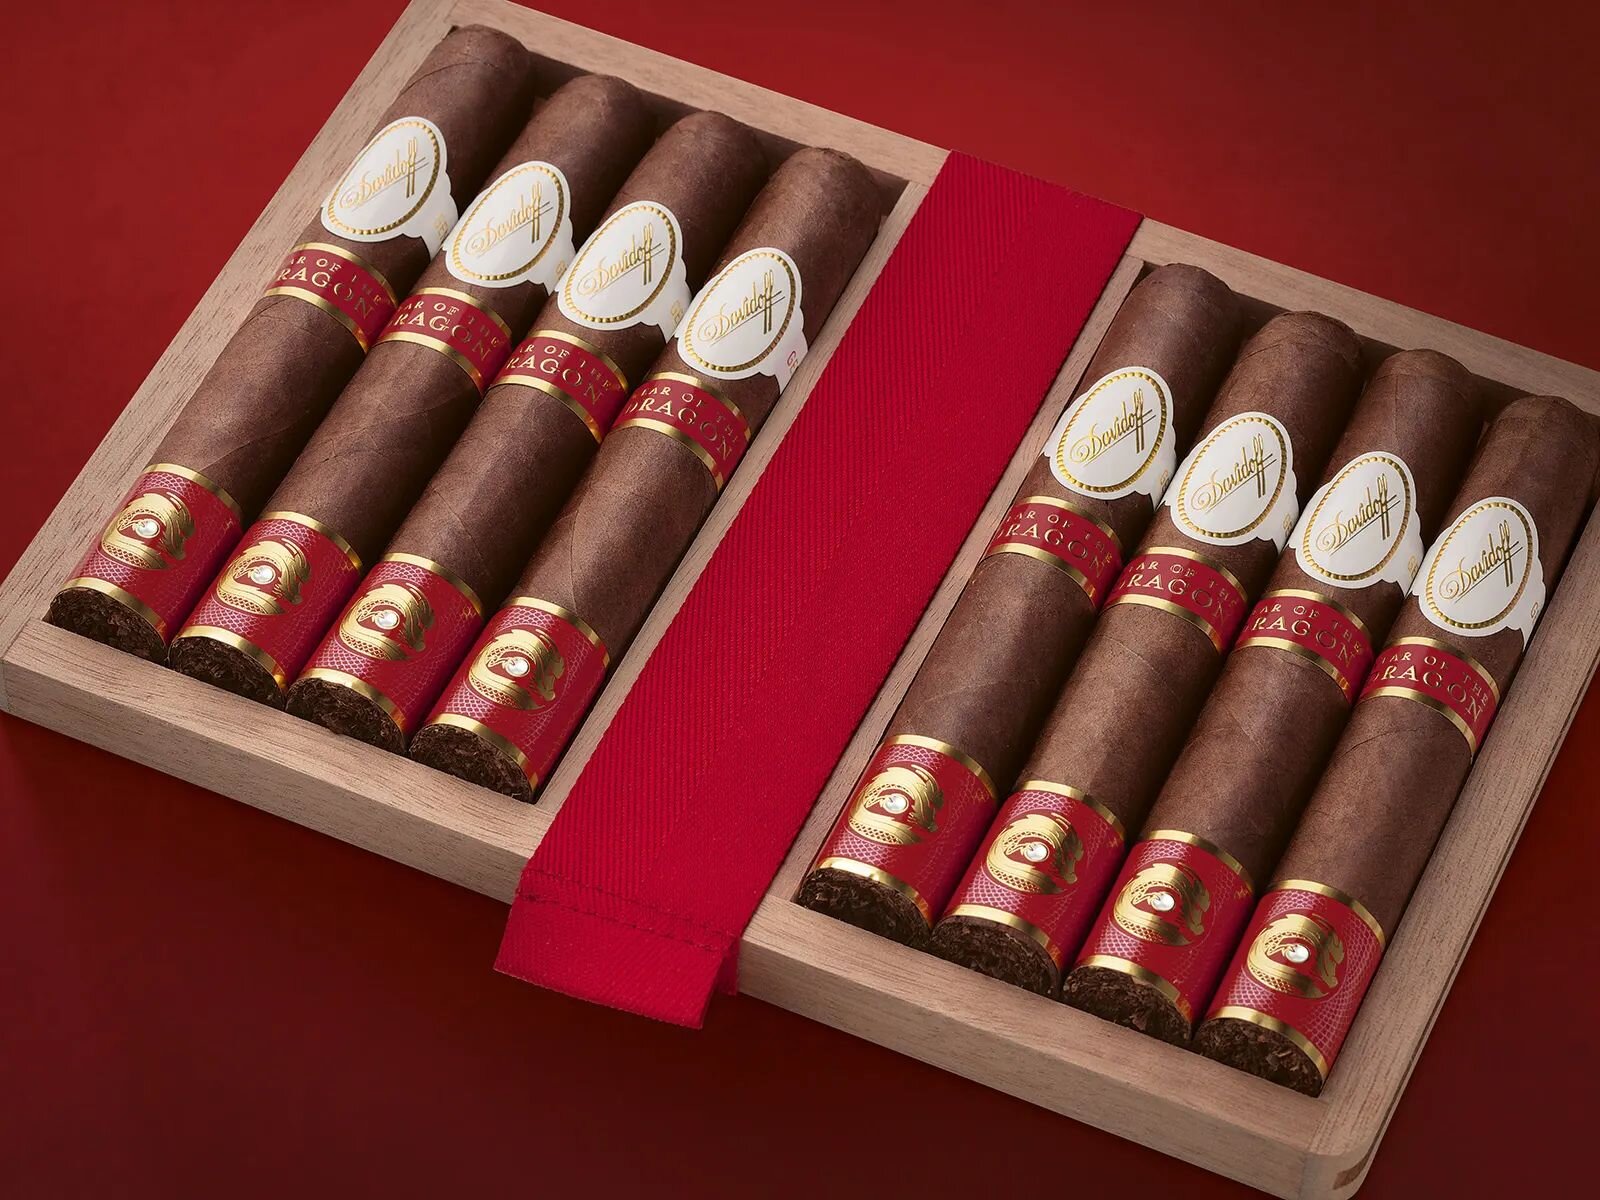 10 Davidoff Year of the Dragon Limited Edition double corona cigars in their opened box.